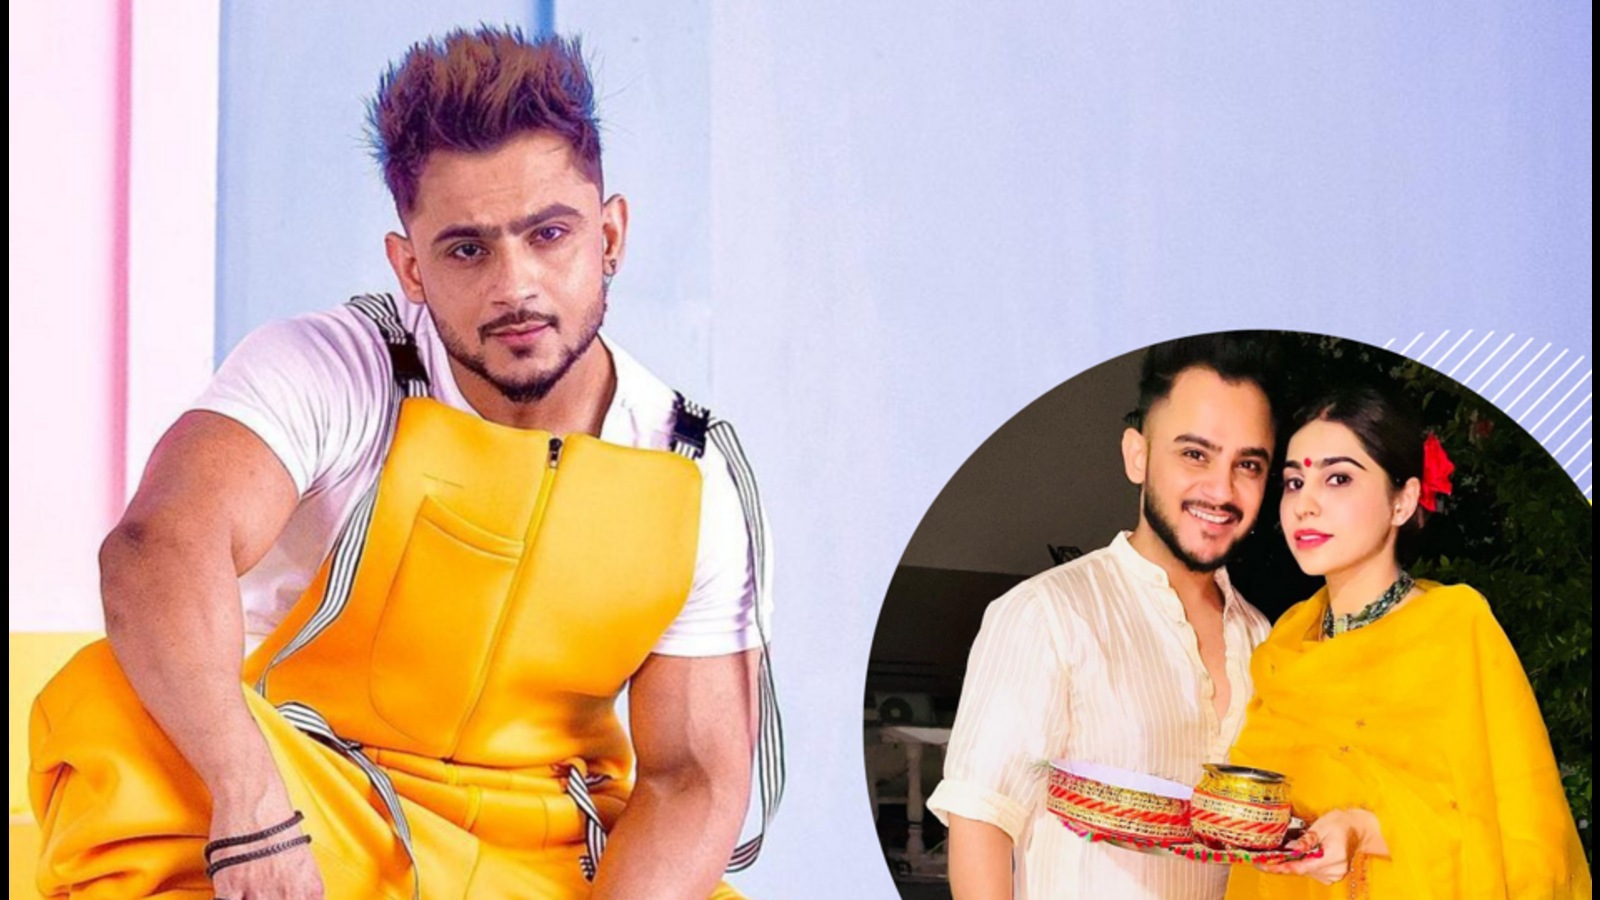 Exclusive: Bigg Boss OTT’s Millind Gaba to tie the knot on April 16?